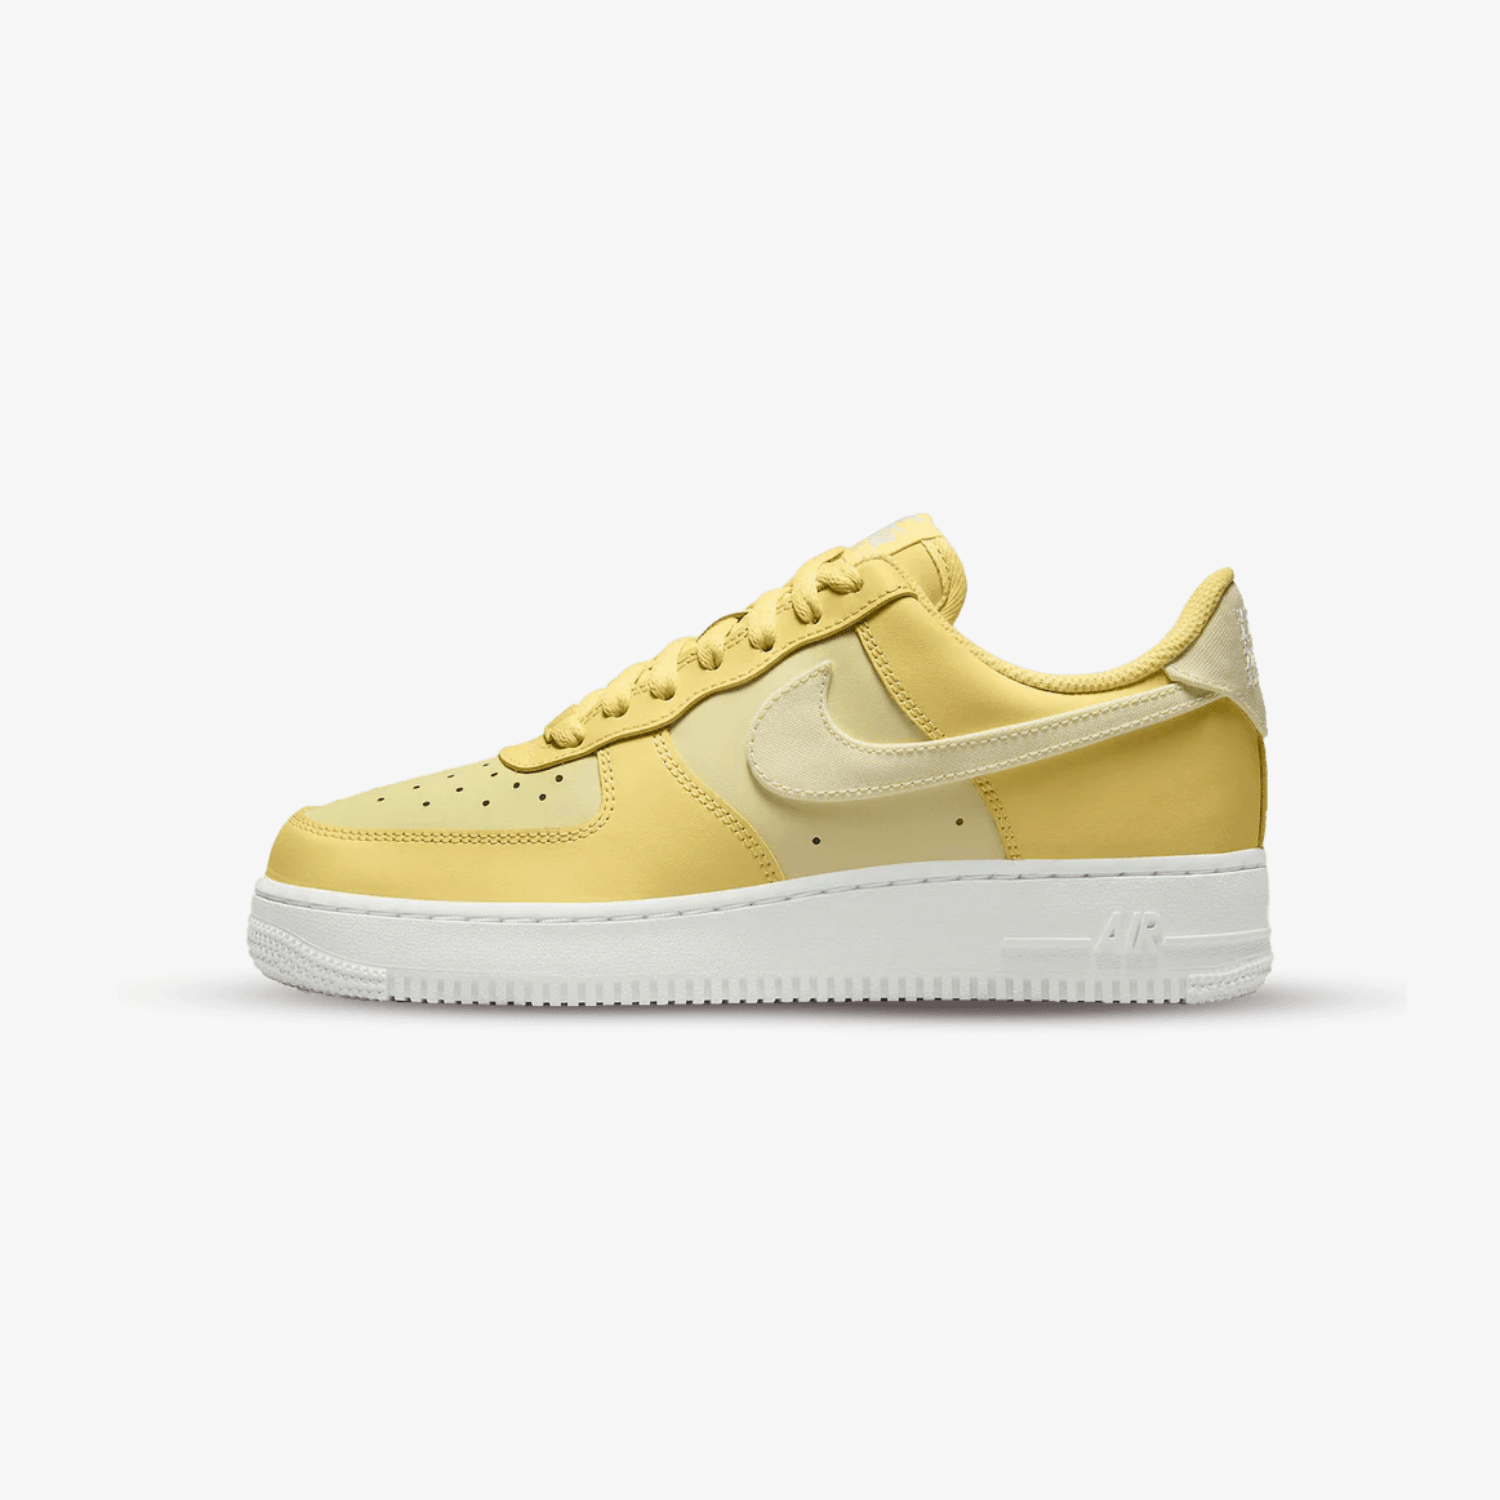    nike-air-force-1-low-cross-yellow-CT3839-004-unfazed-1